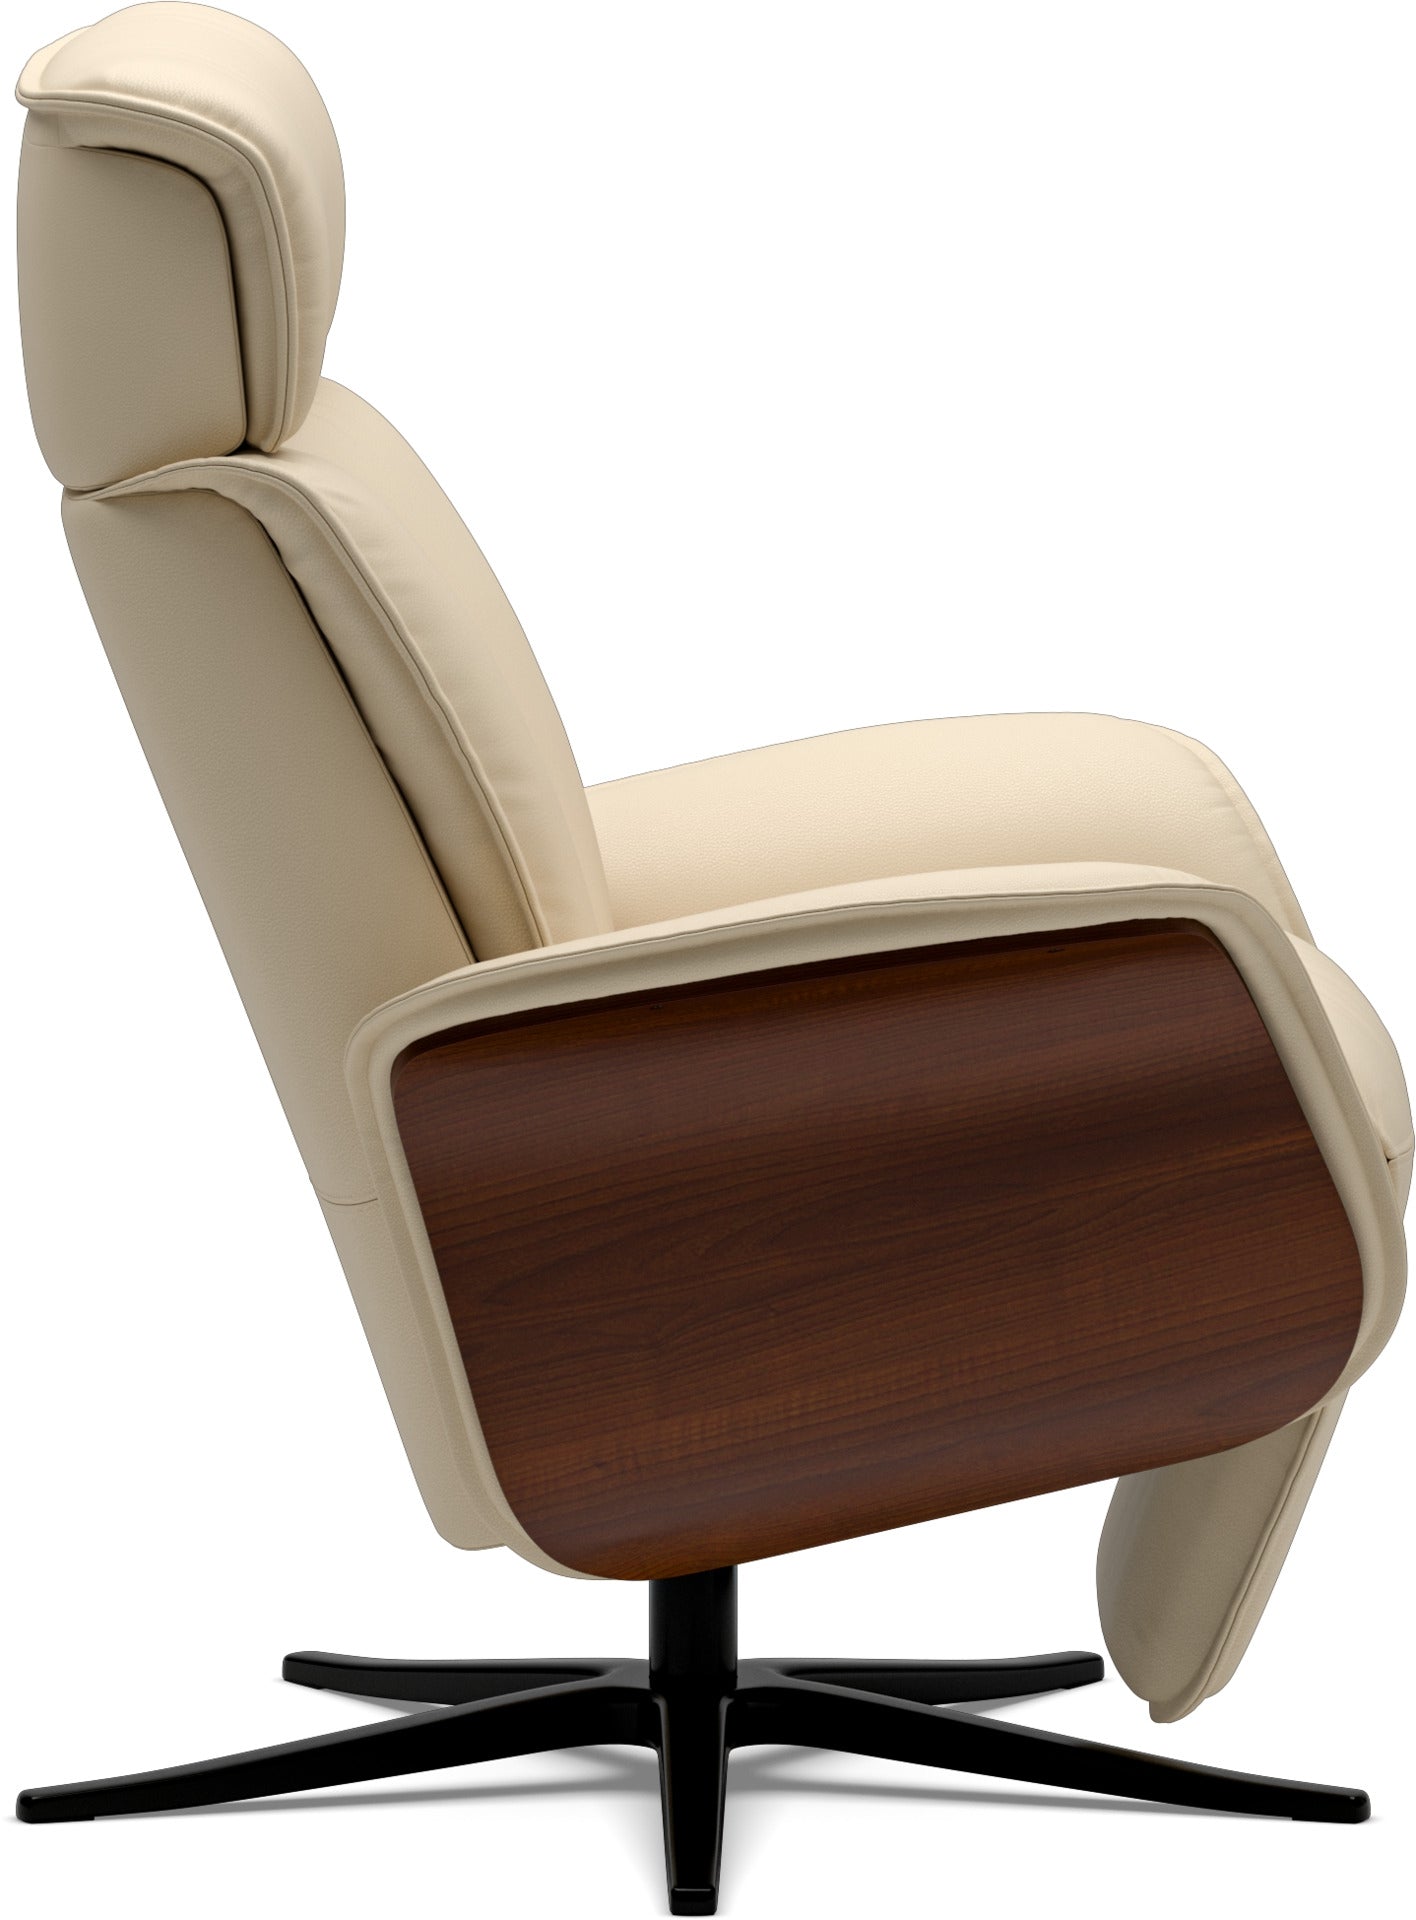 Space 5500 Manual Integrated Recliner